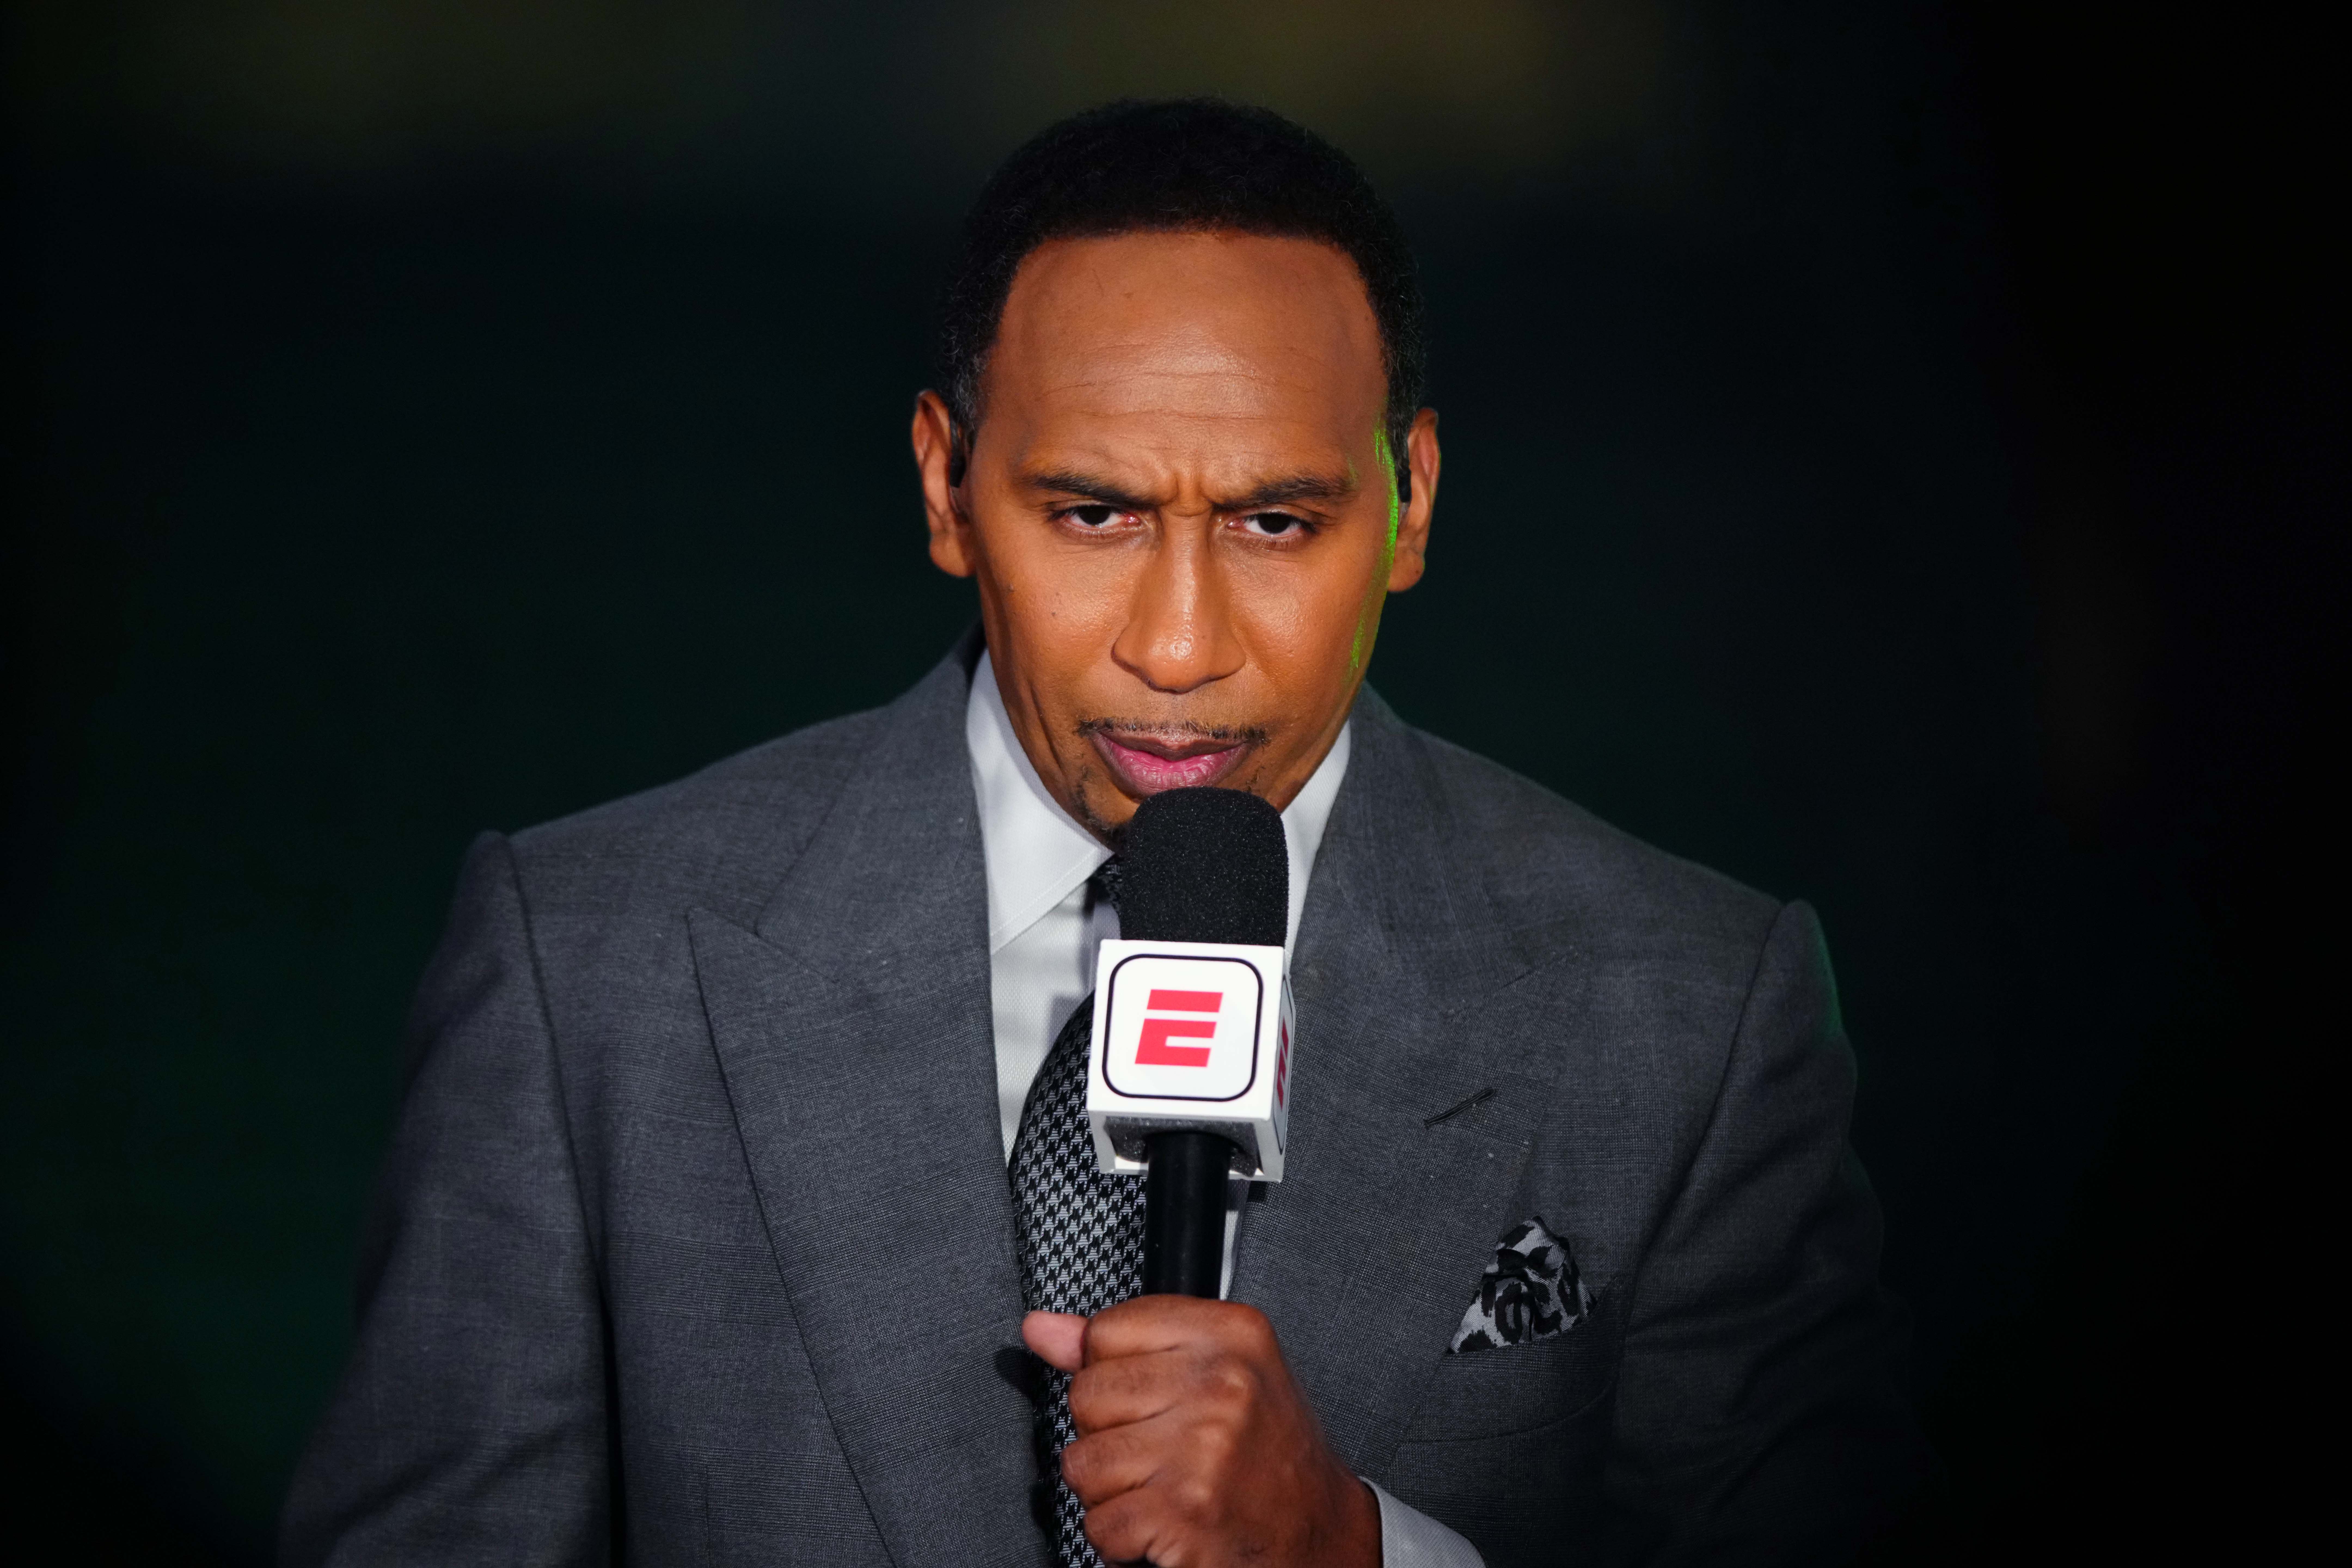 Malika Andrews, Stephen A. Smith had a heated First Take argument about the Ime Udoka scandal: ‘This is not about pointing fingers. Stop’